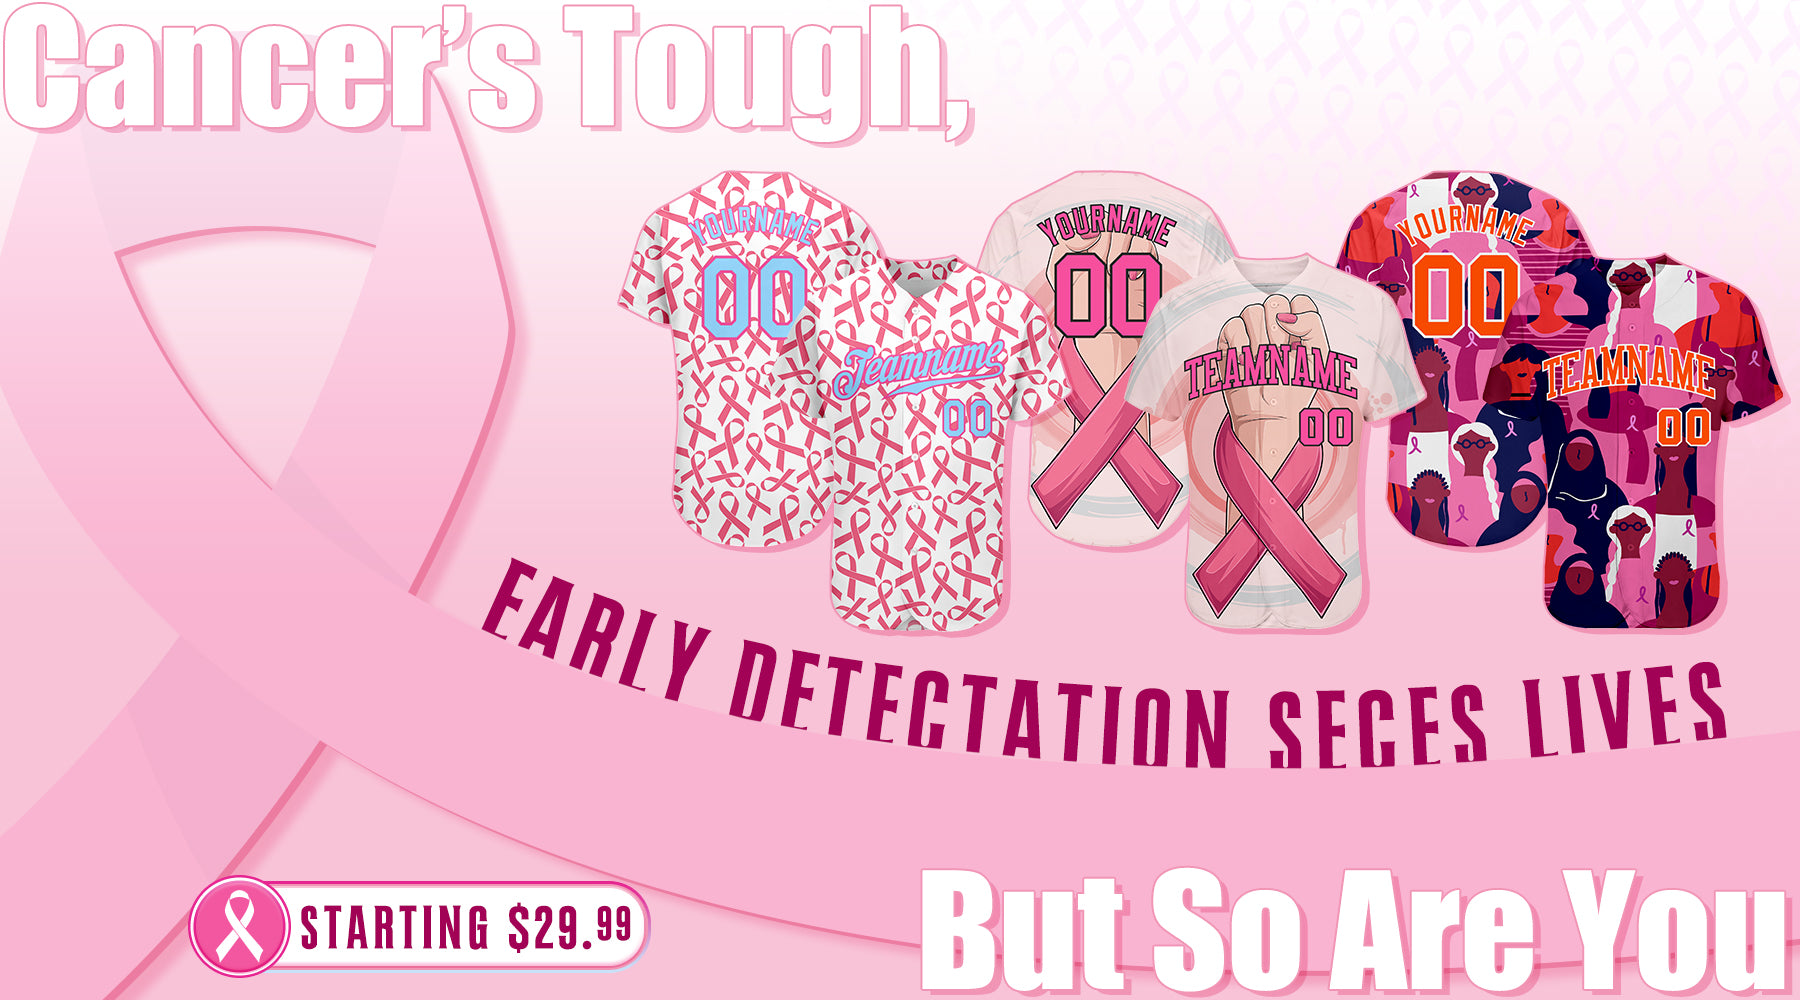 Breast Cancer Awareness Jersey